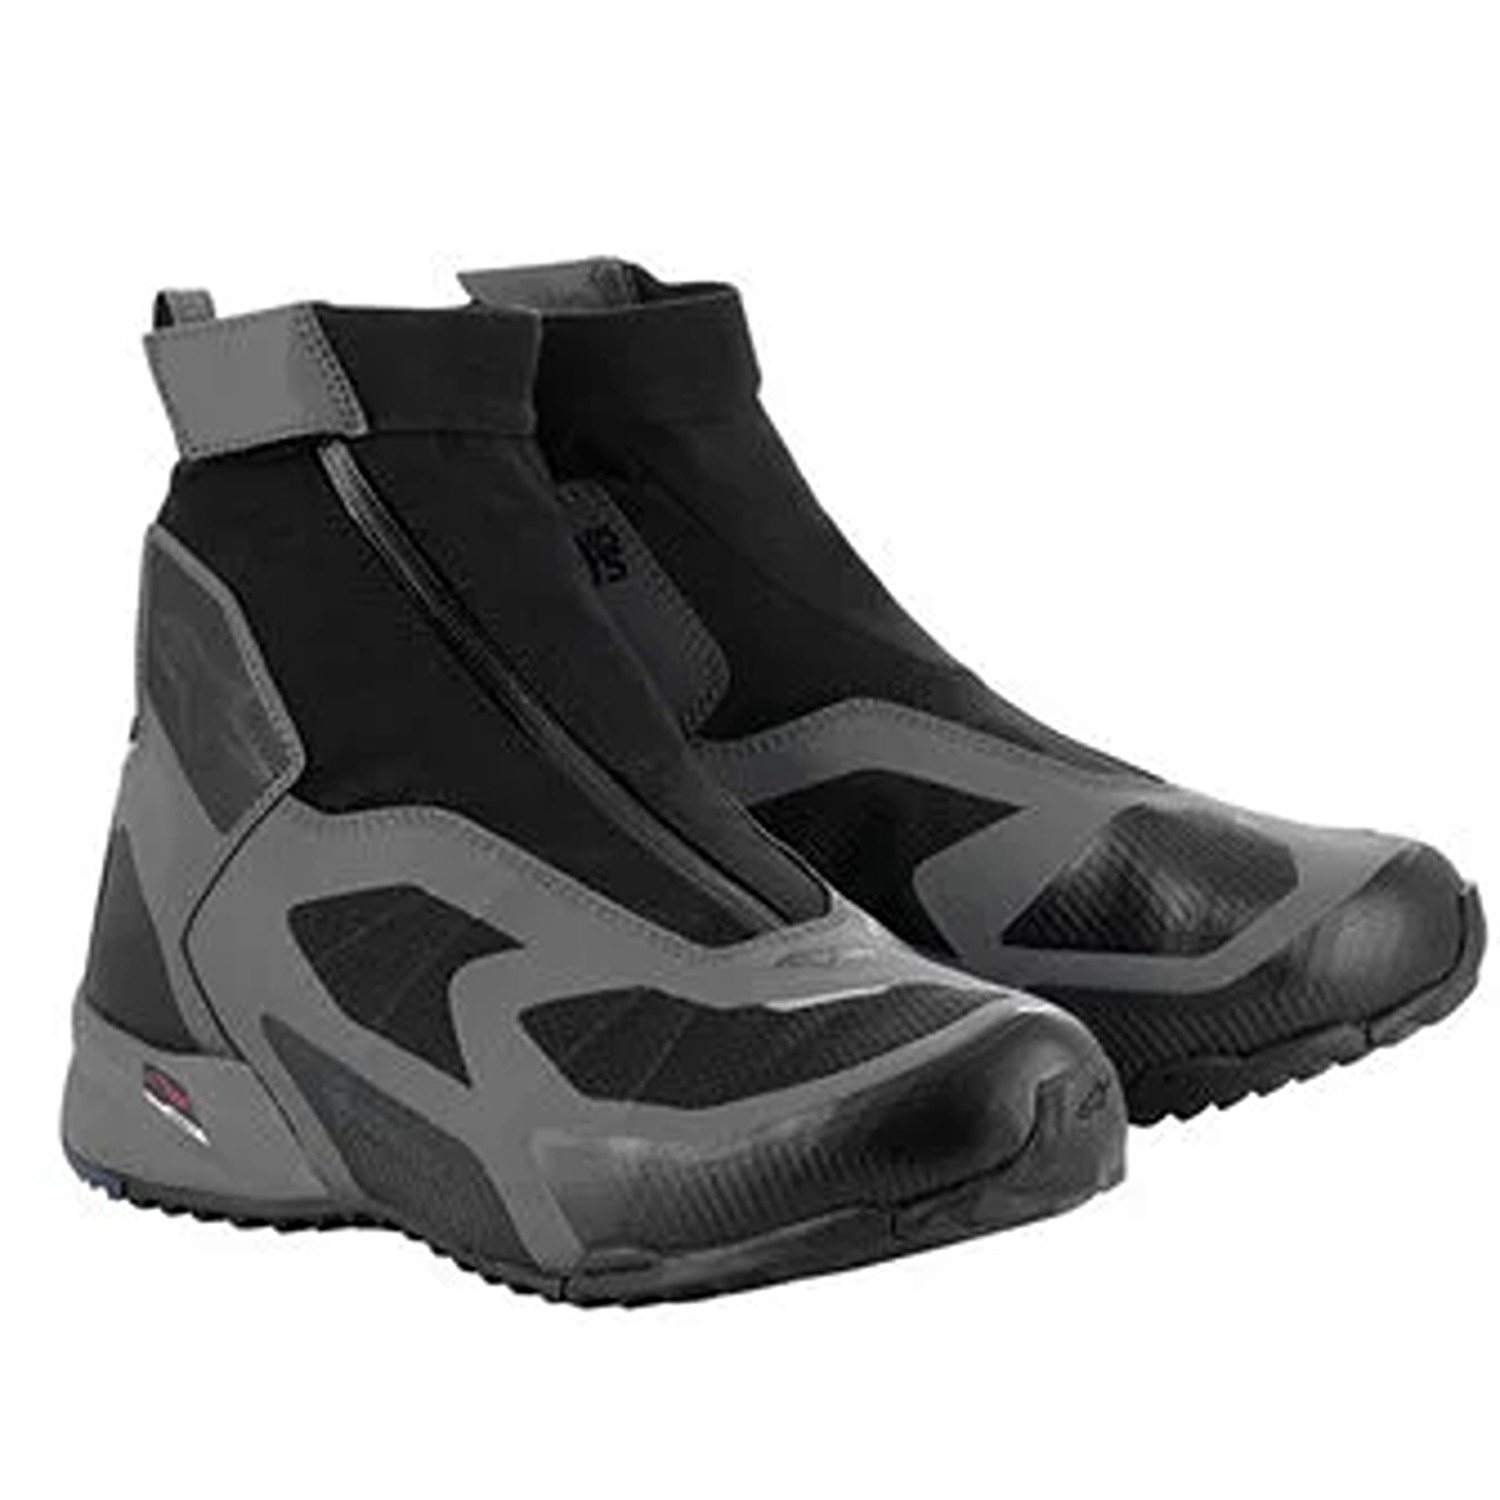 Image of Alpinestars CR-8 Gore-Tex Shoes Black Mid Gray Bright Red Size US 10 EN